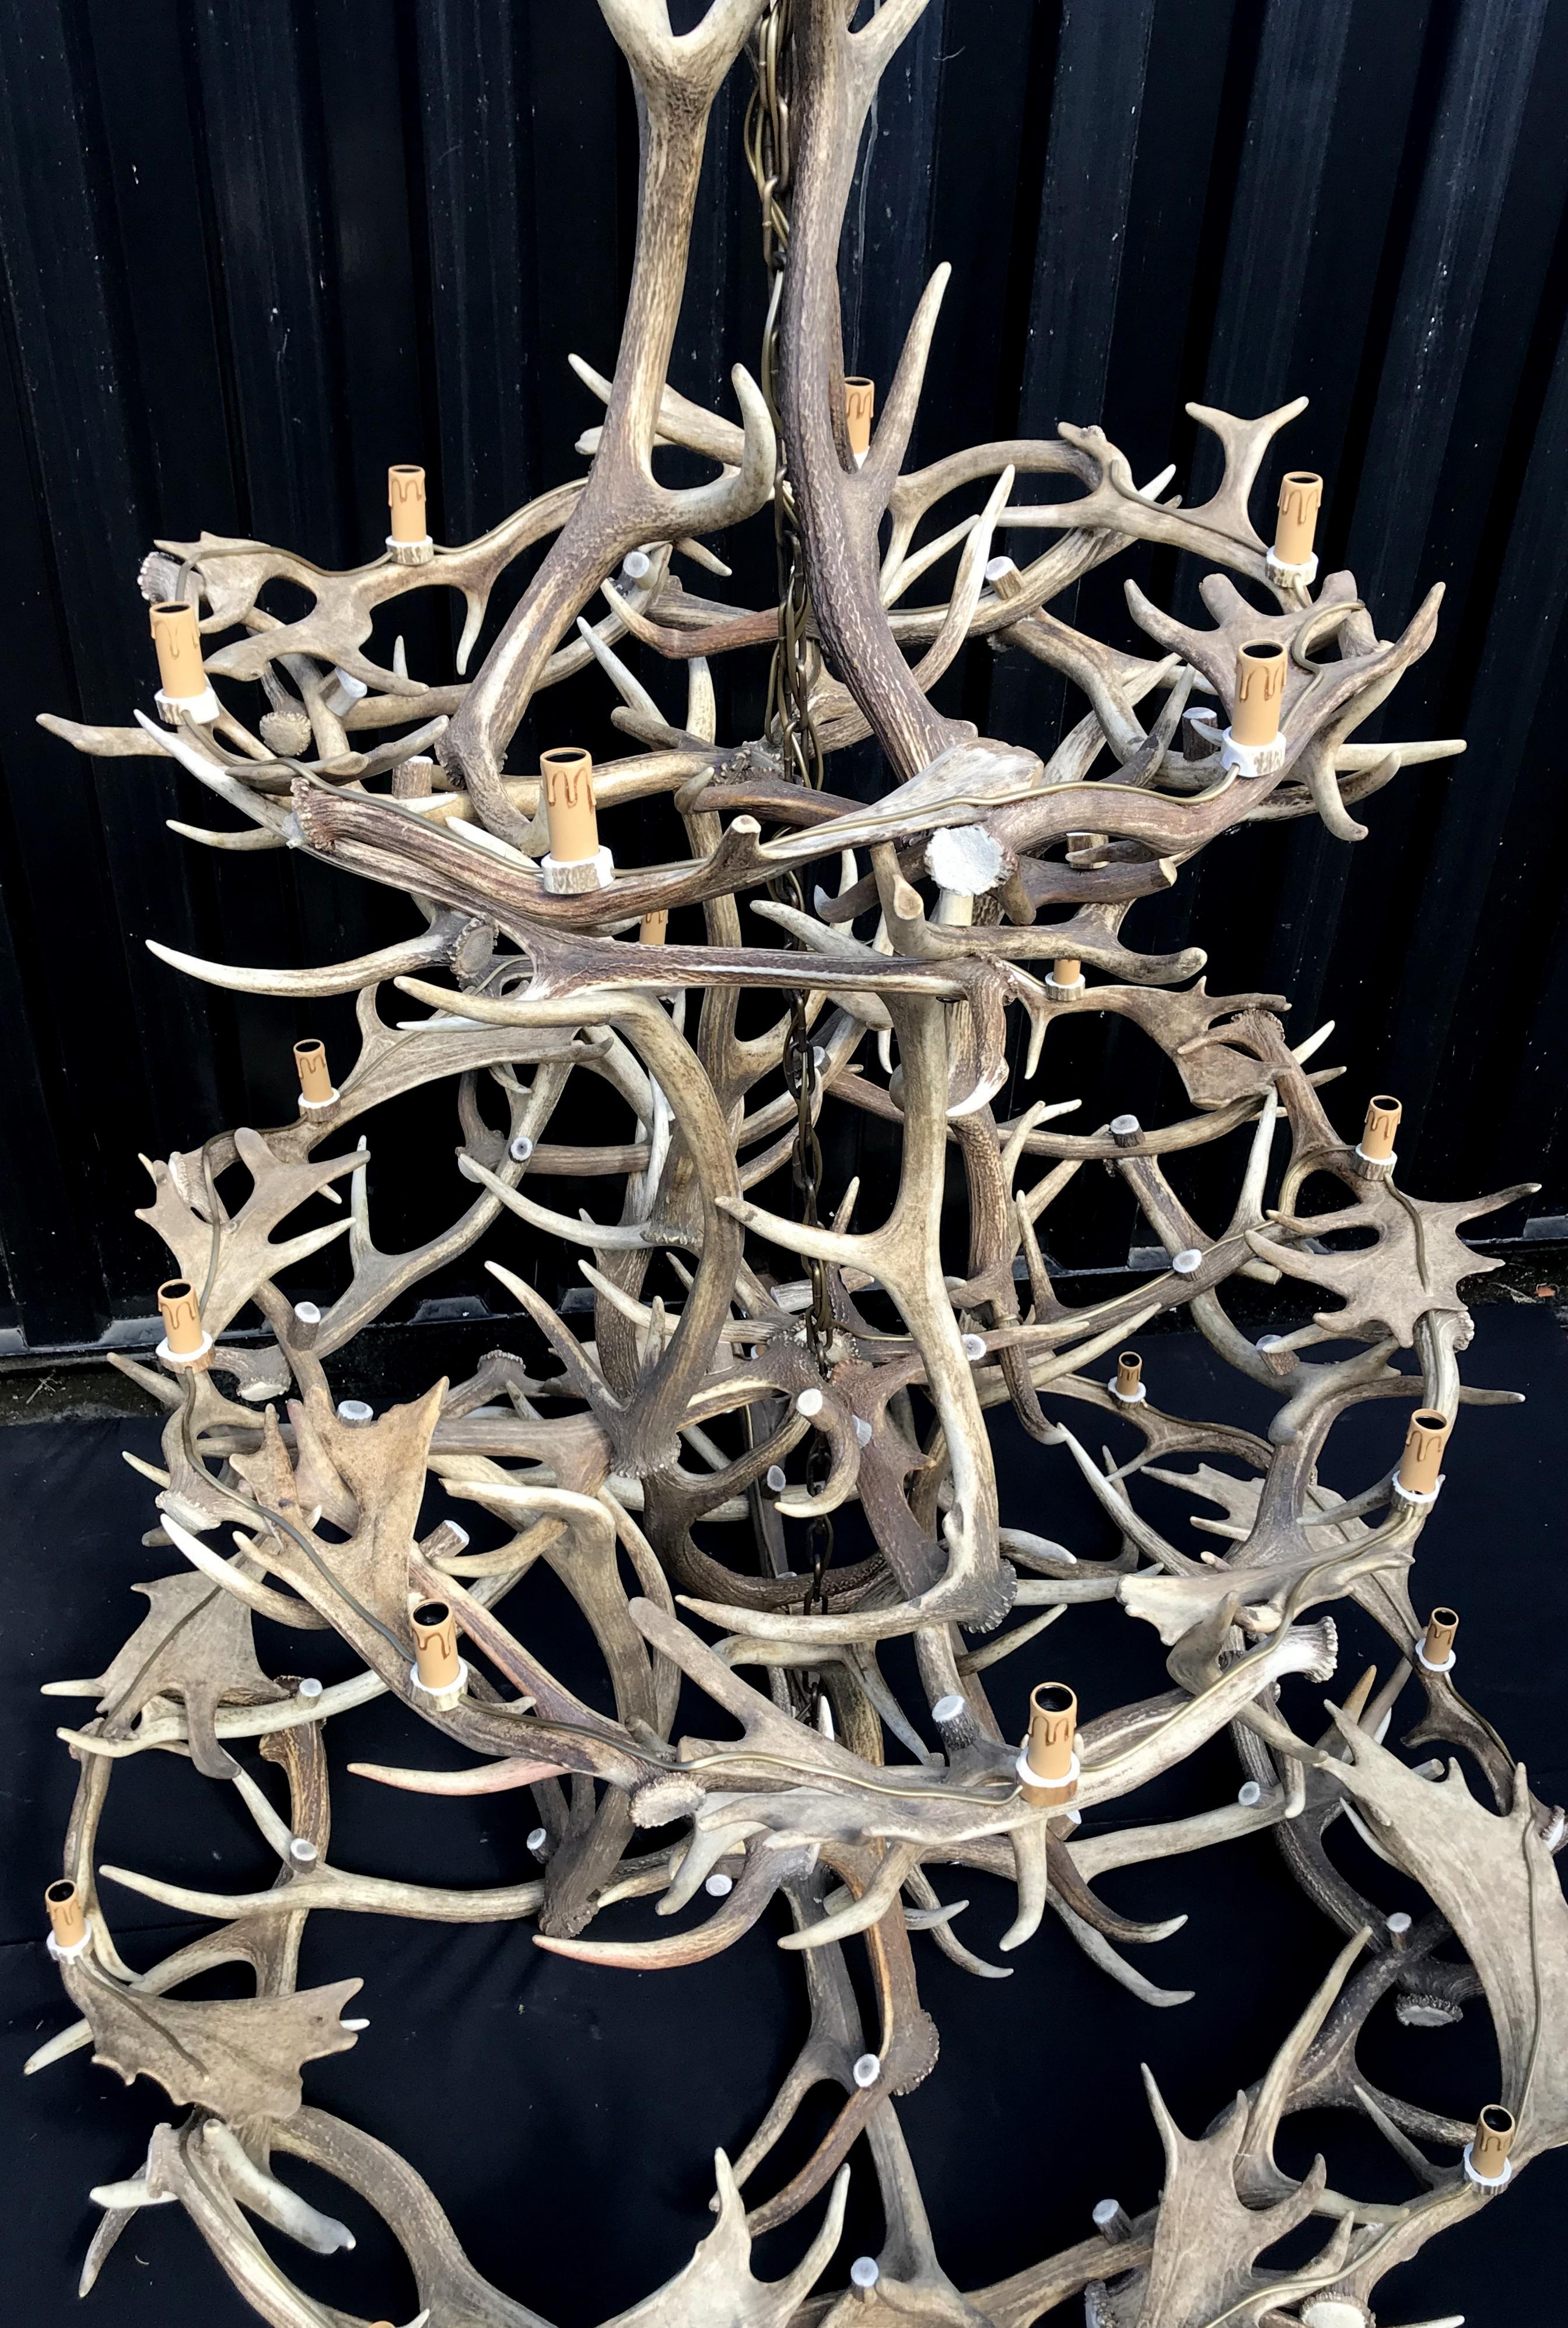 Imposing Chandelier Made of Antlers 2